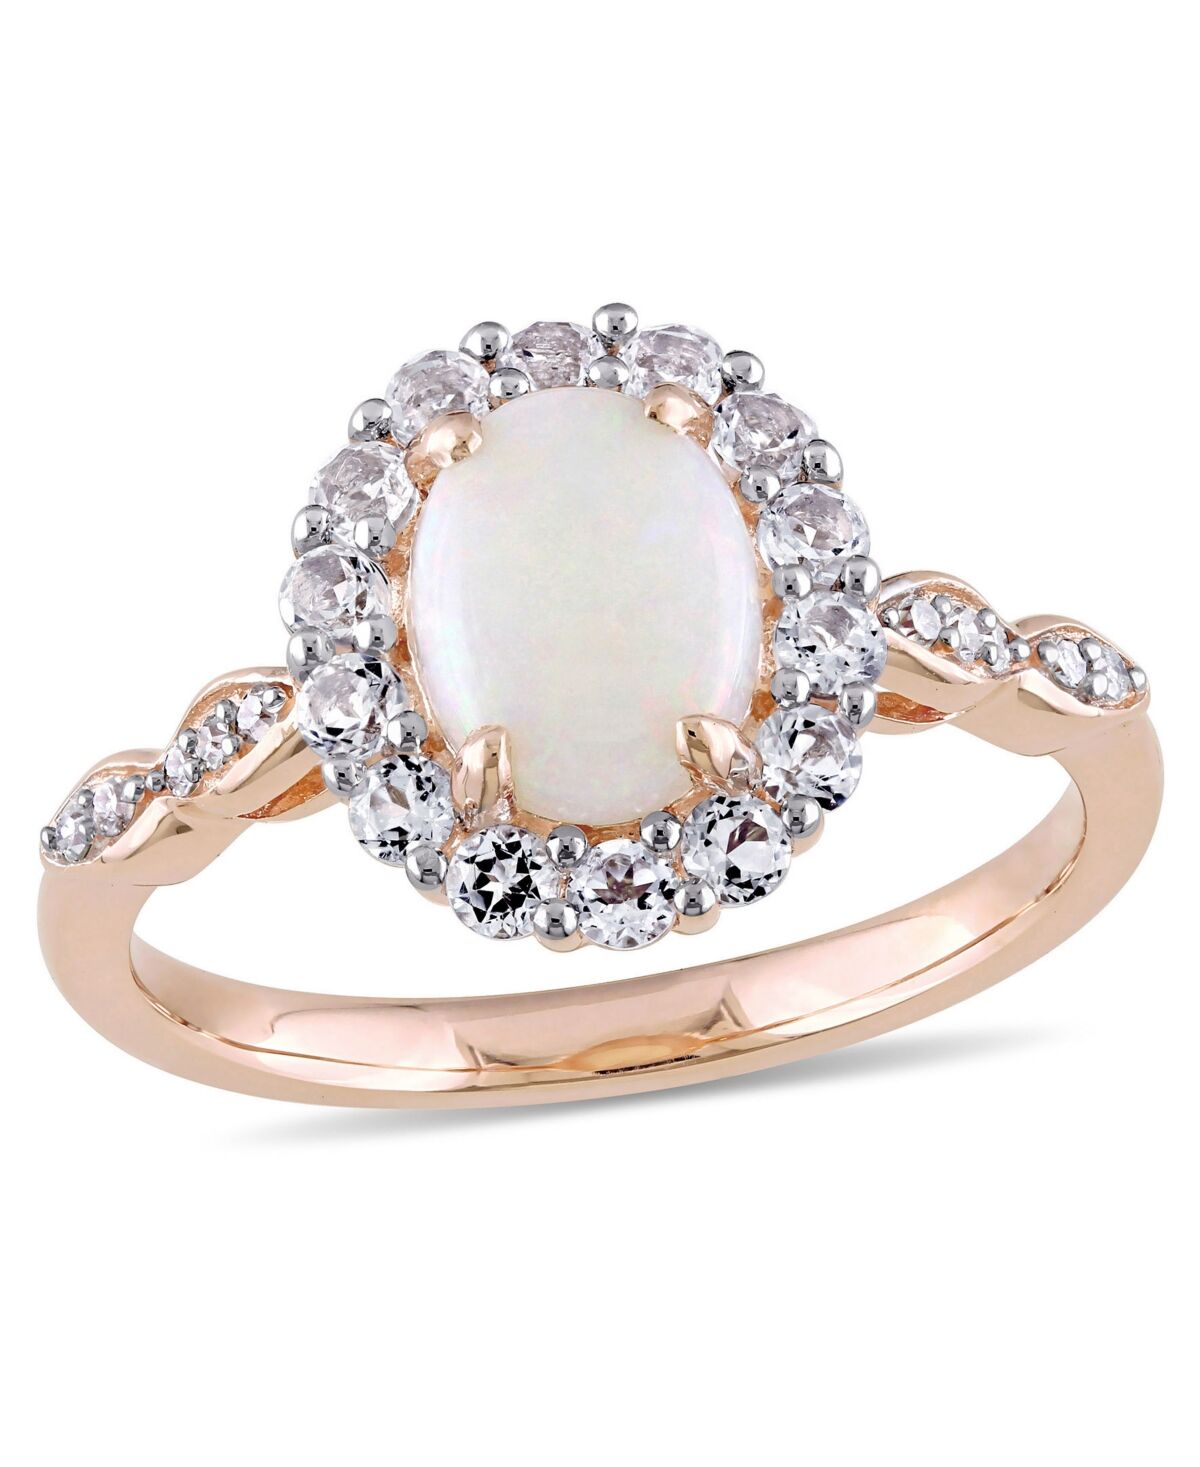 Macy's Opal (7/8 ct. t.w.), White Topaz (5/8 ct. t.w.) and Diamond Accent Vintage Halo Ring in 14k Rose Gold - Opal